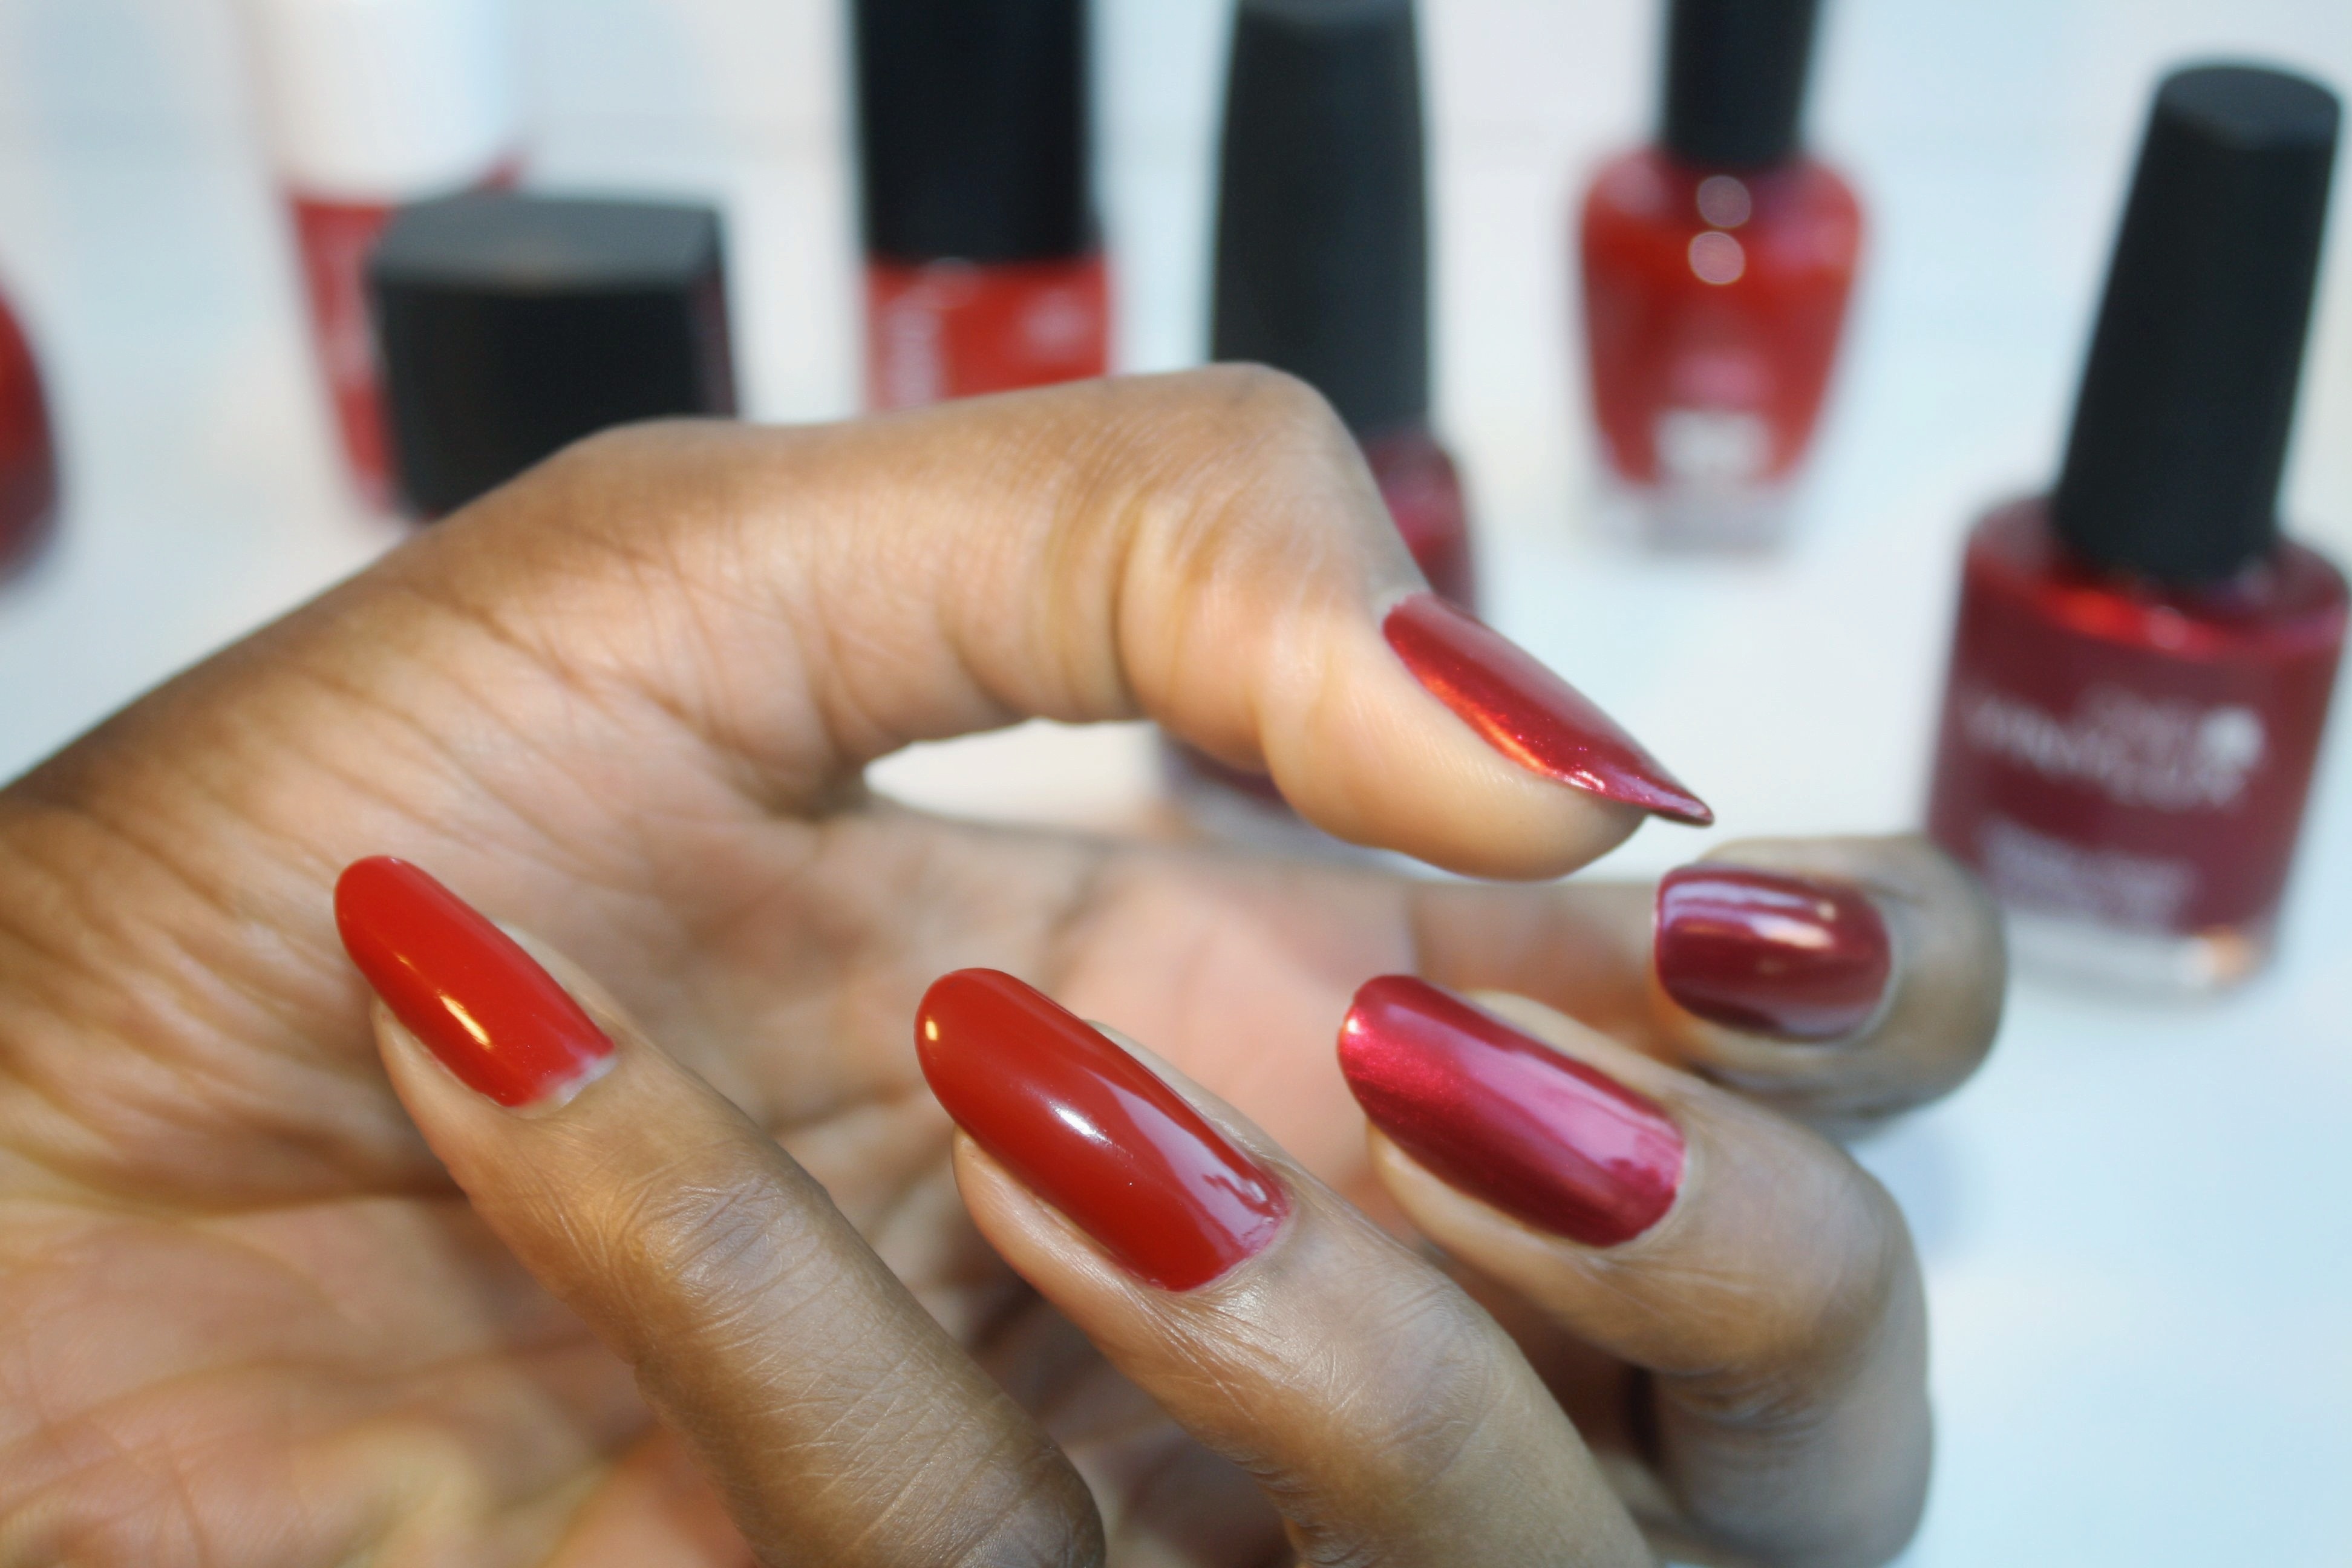 8. "How to Create the Perfect Nail Polish Color Combo for Your Outfit" - wide 5